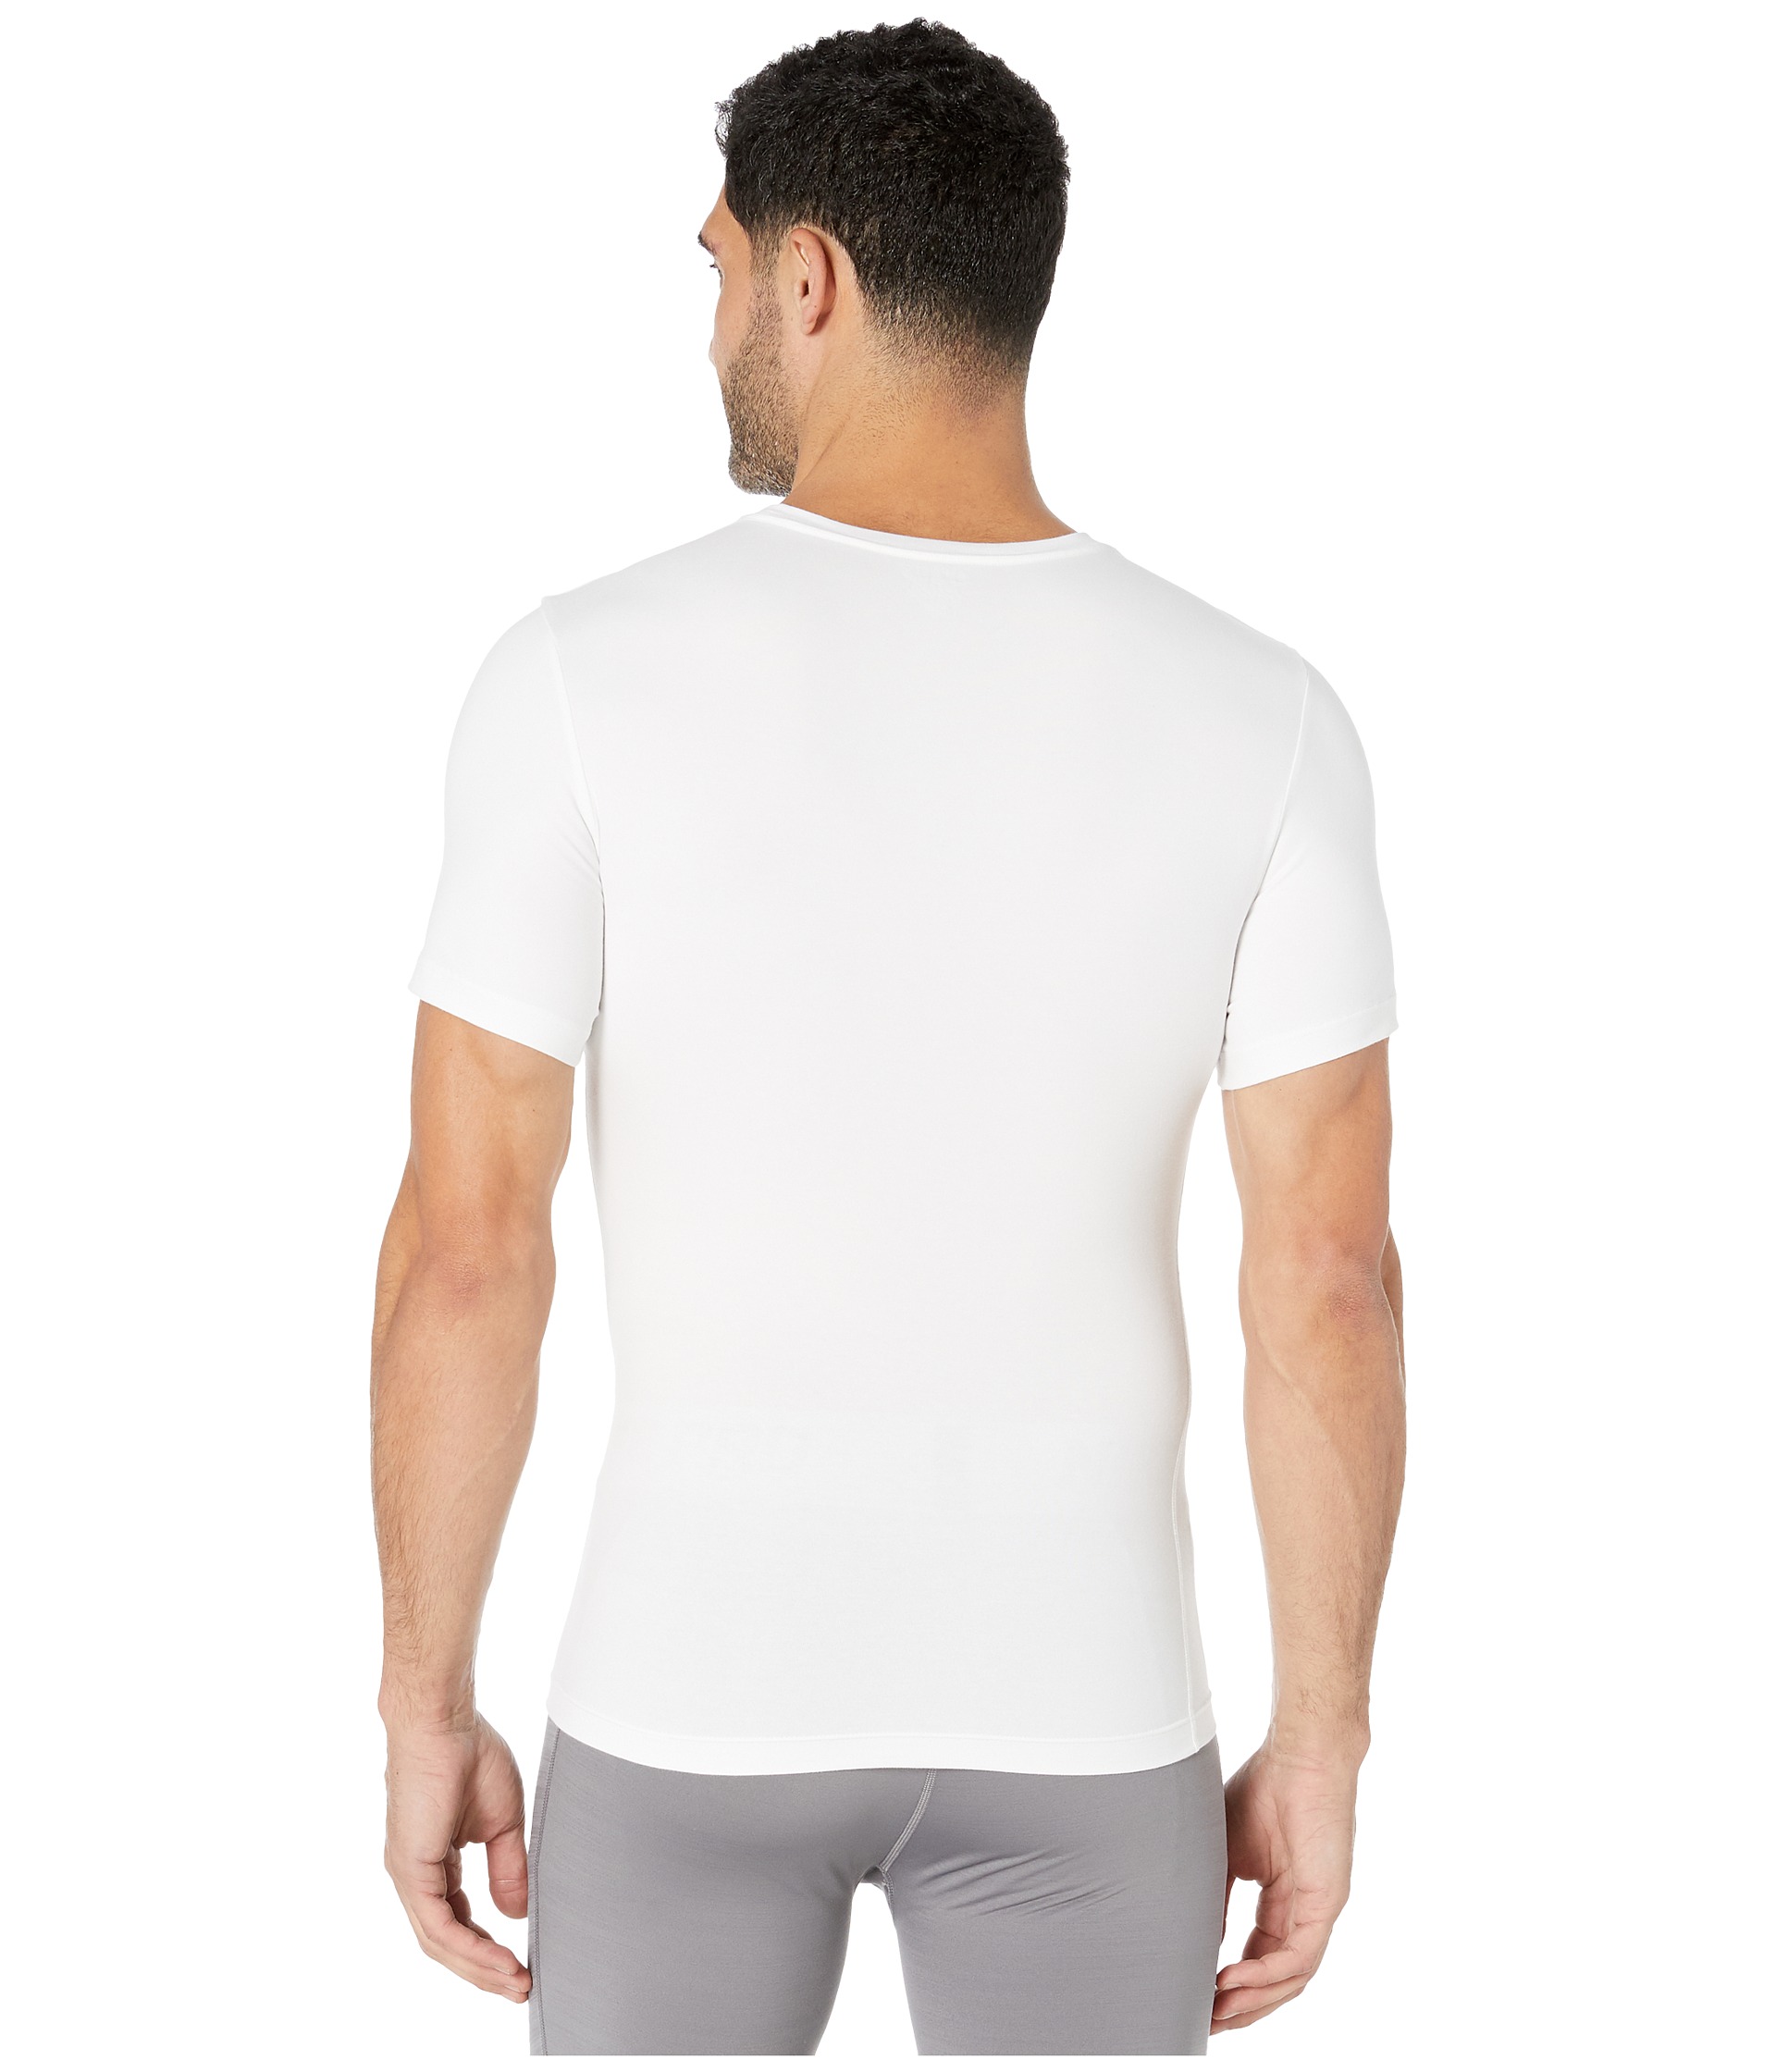 Spanx for Men Cotton Compression Crew - Zappos.com Free Shipping BOTH Ways